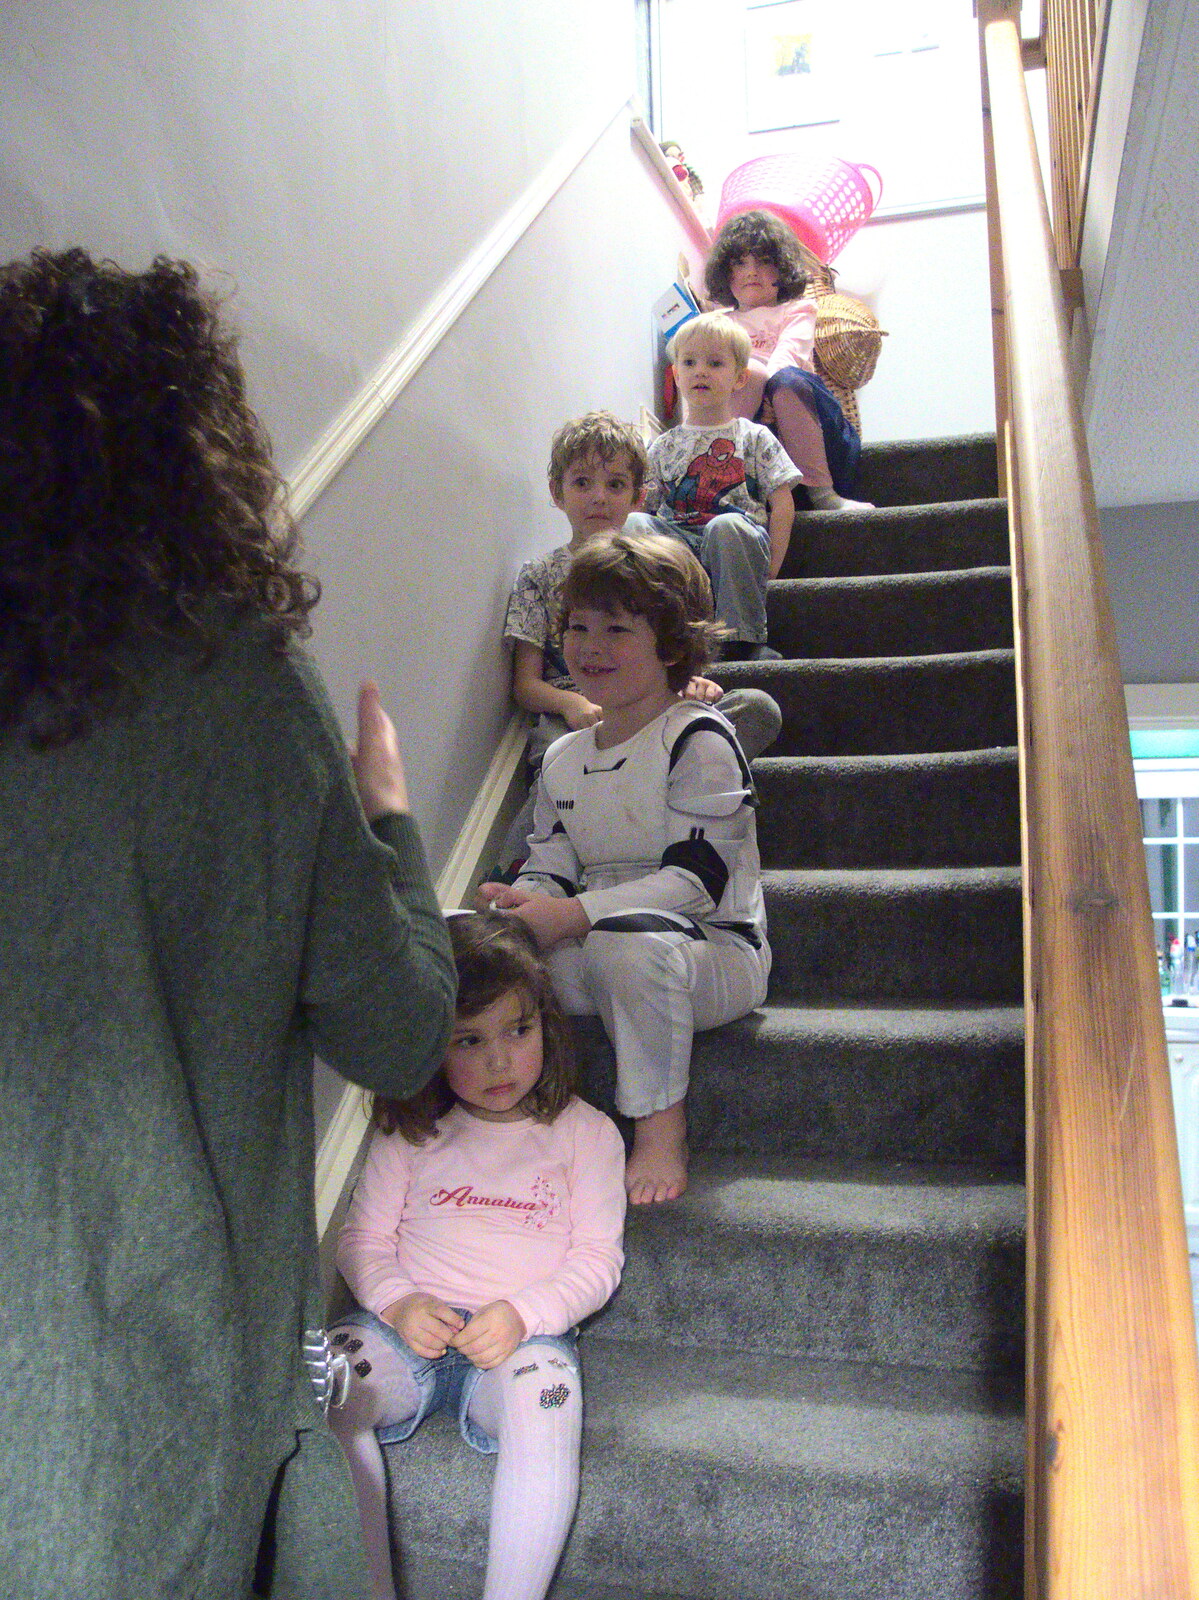 The children are all on a naughty step from Christmas in Blackrock and St. Stephen's in Ballybrack, Dublin, Ireland - 25th December 2015